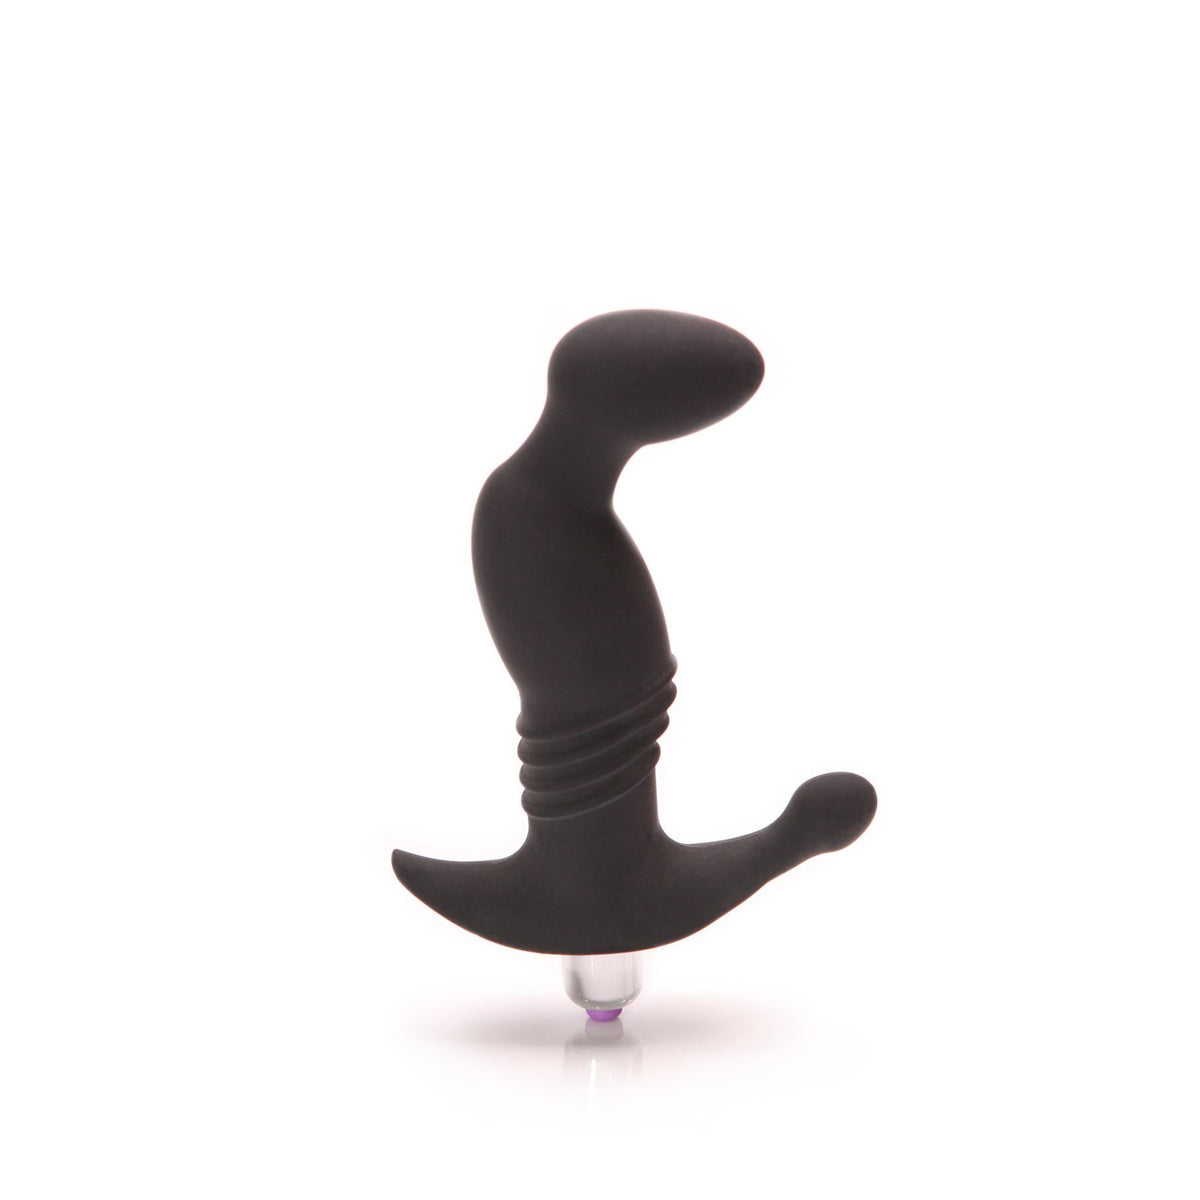 The Prostate Play & Health Massager